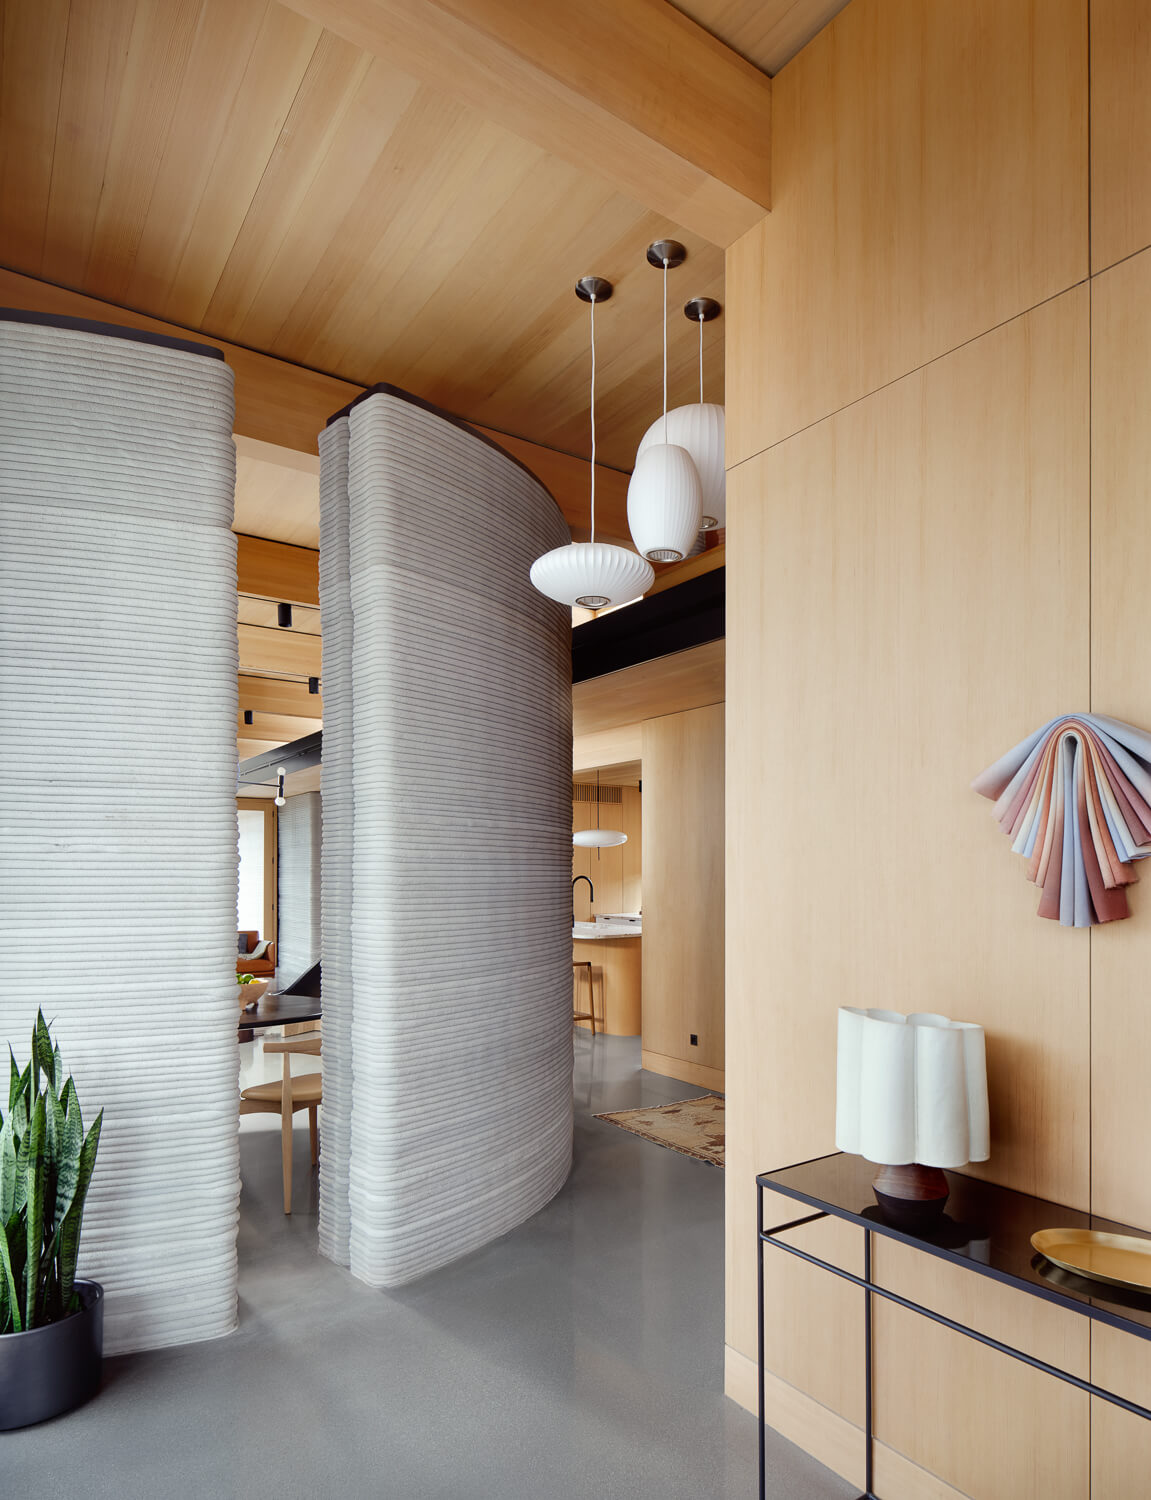 interior of a home with timber wall and ceilings and concrete wall system